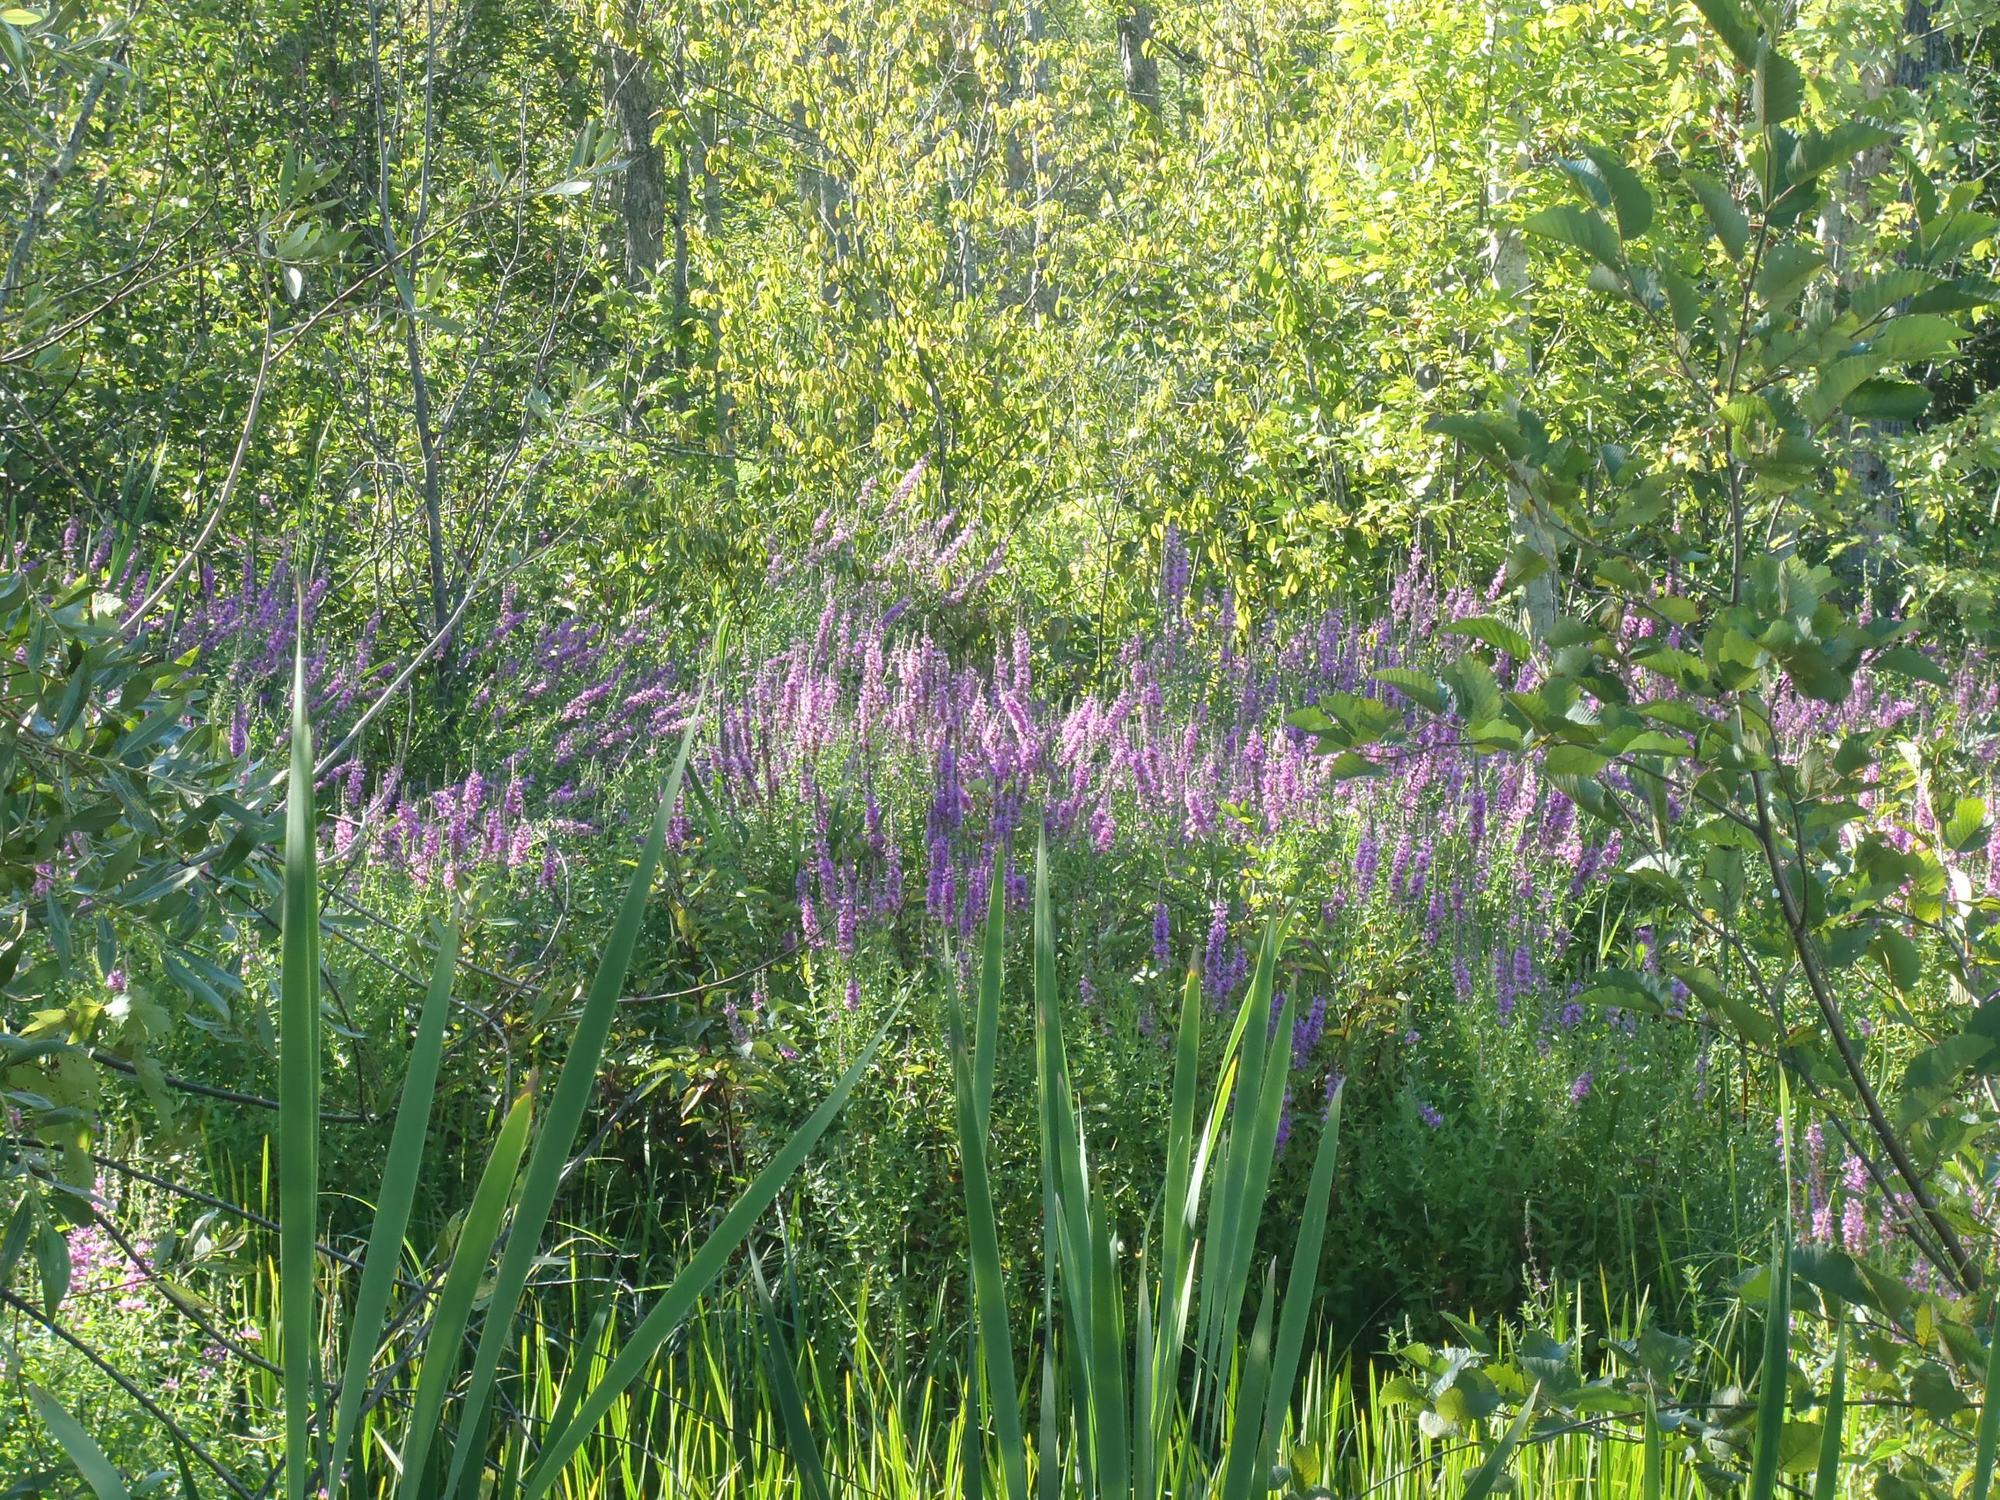 Purple loosestrife is an attractive wetland plant, but it is also an invasive species that spreads quickly and can dominate native species.